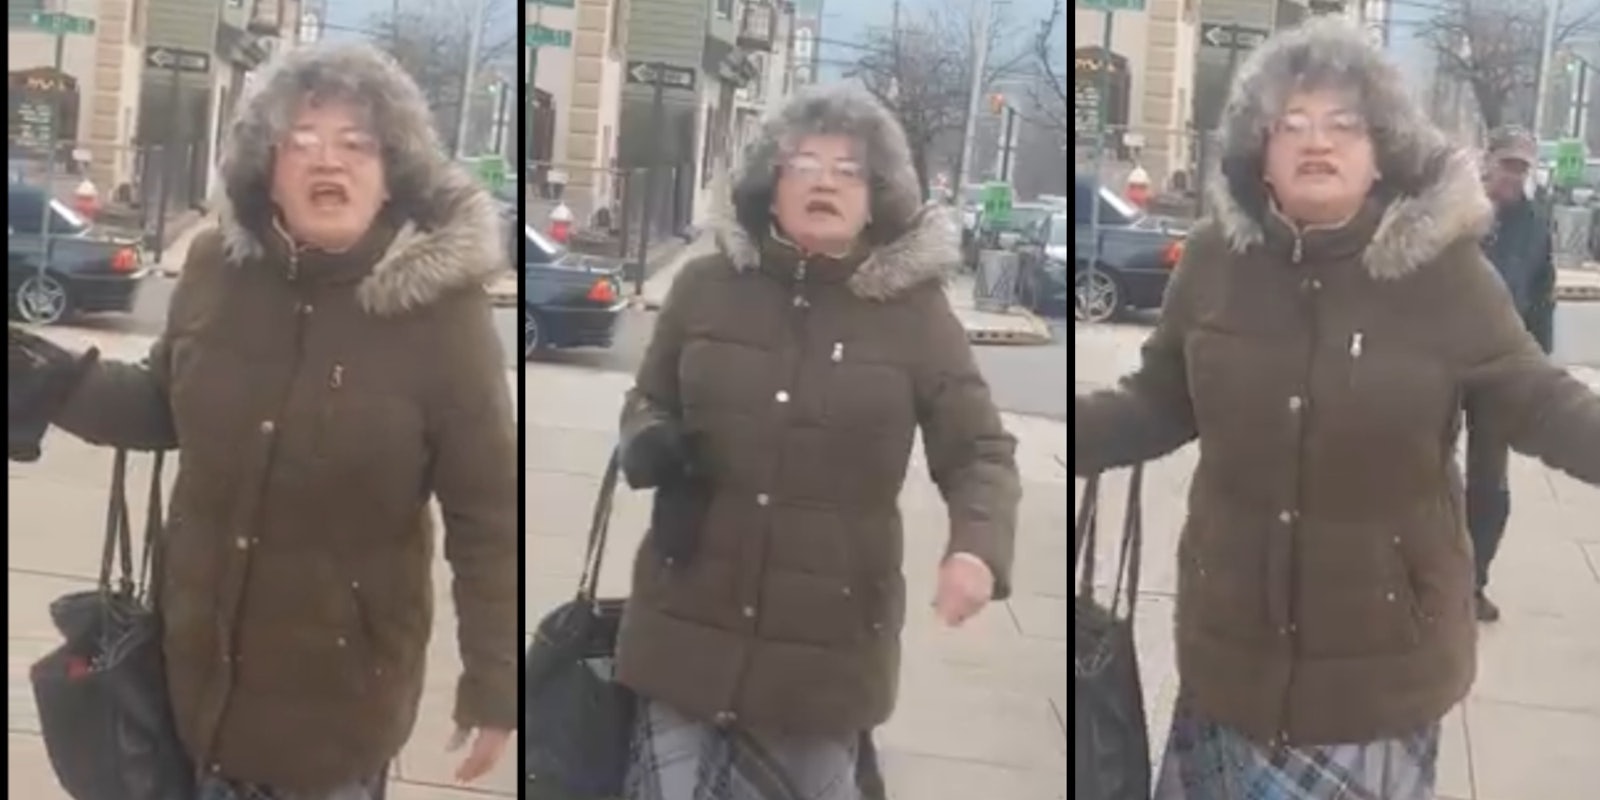 New Jersey woman who yelled N-word at Black woman on street